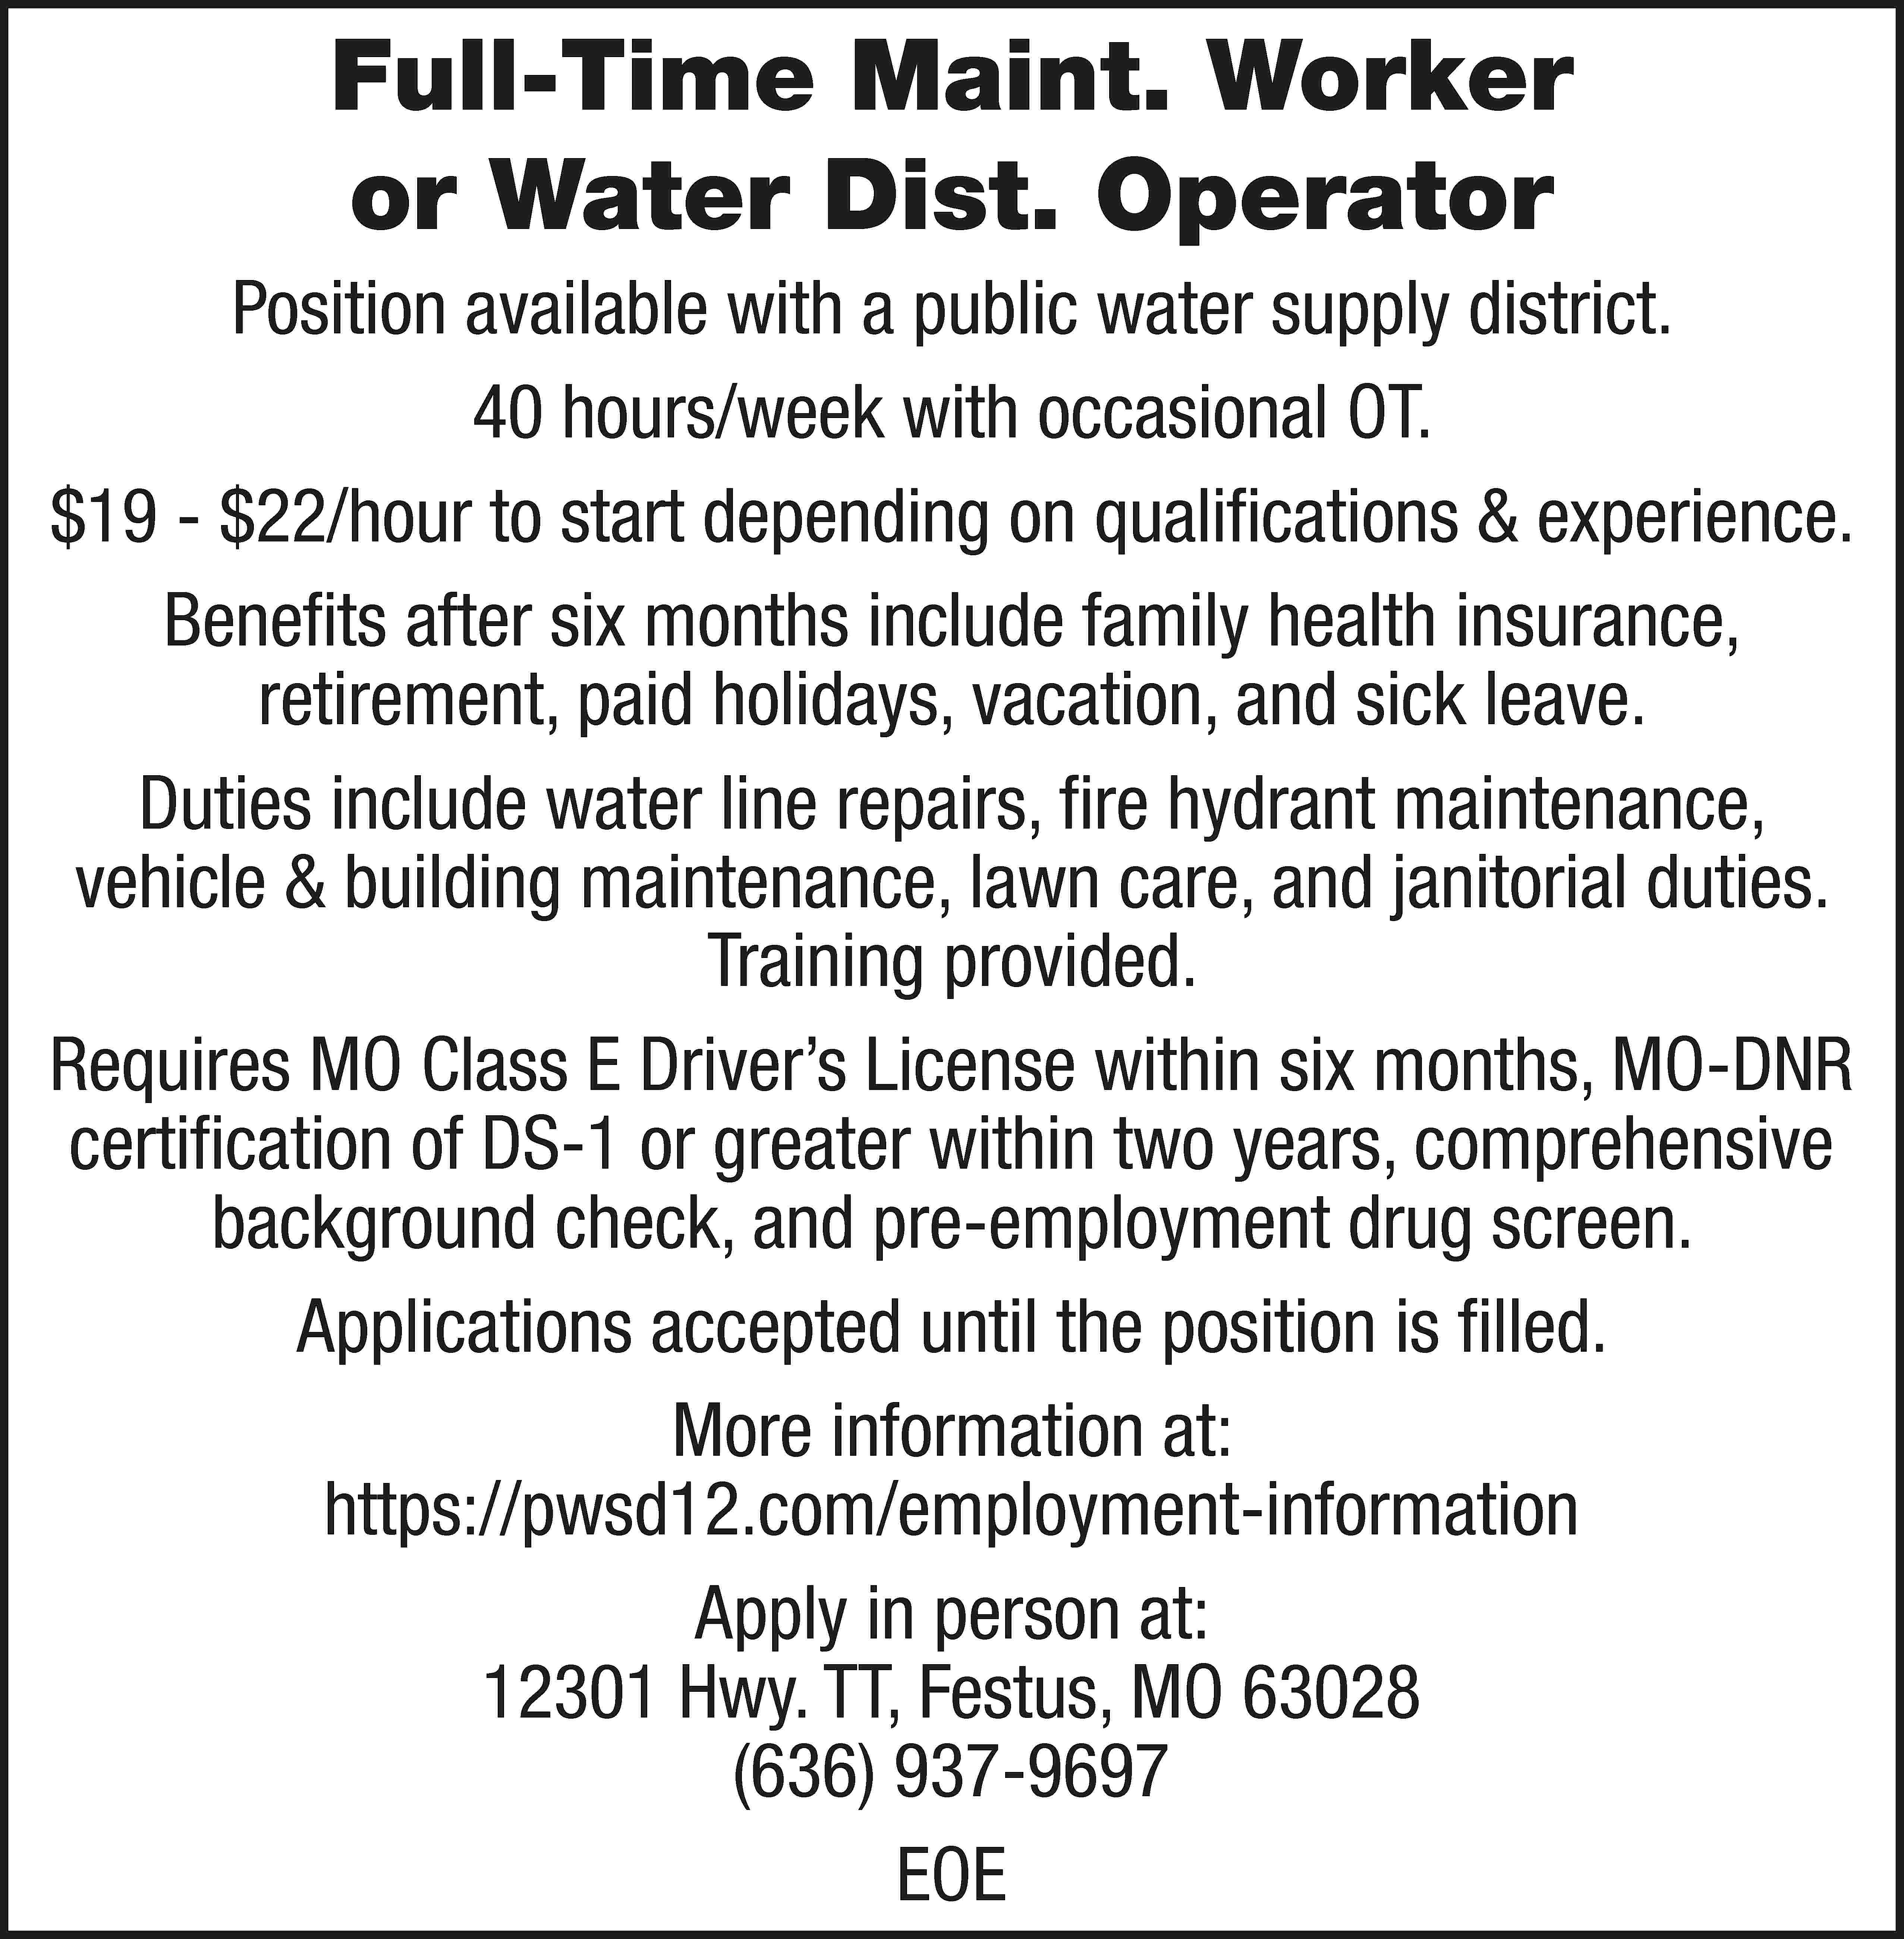 Full-Time Maint. Worker or Water  Full-Time Maint. Worker or Water Dist. Operator Position available with a public water supply district. 40 hours/week with occasional OT. $19 - $22/hour to start depending on qualifications & experience. Benefits after six months include family health insurance, retirement, paid holidays, vacation, and sick leave. Duties include water line repairs, fire hydrant maintenance, vehicle & building maintenance, lawn care, and janitorial duties. Training provided. Requires MO Class E Driver’s License within six months, MO-DNR certification of DS-1 or greater within two years, comprehensive background check, and pre-employment drug screen. Applications accepted until the position is filled. More information at: https://pwsd12.com/employment-information Apply in person at: 12301 Hwy. TT, Festus, MO 63028 (636) 937-9697 EOE